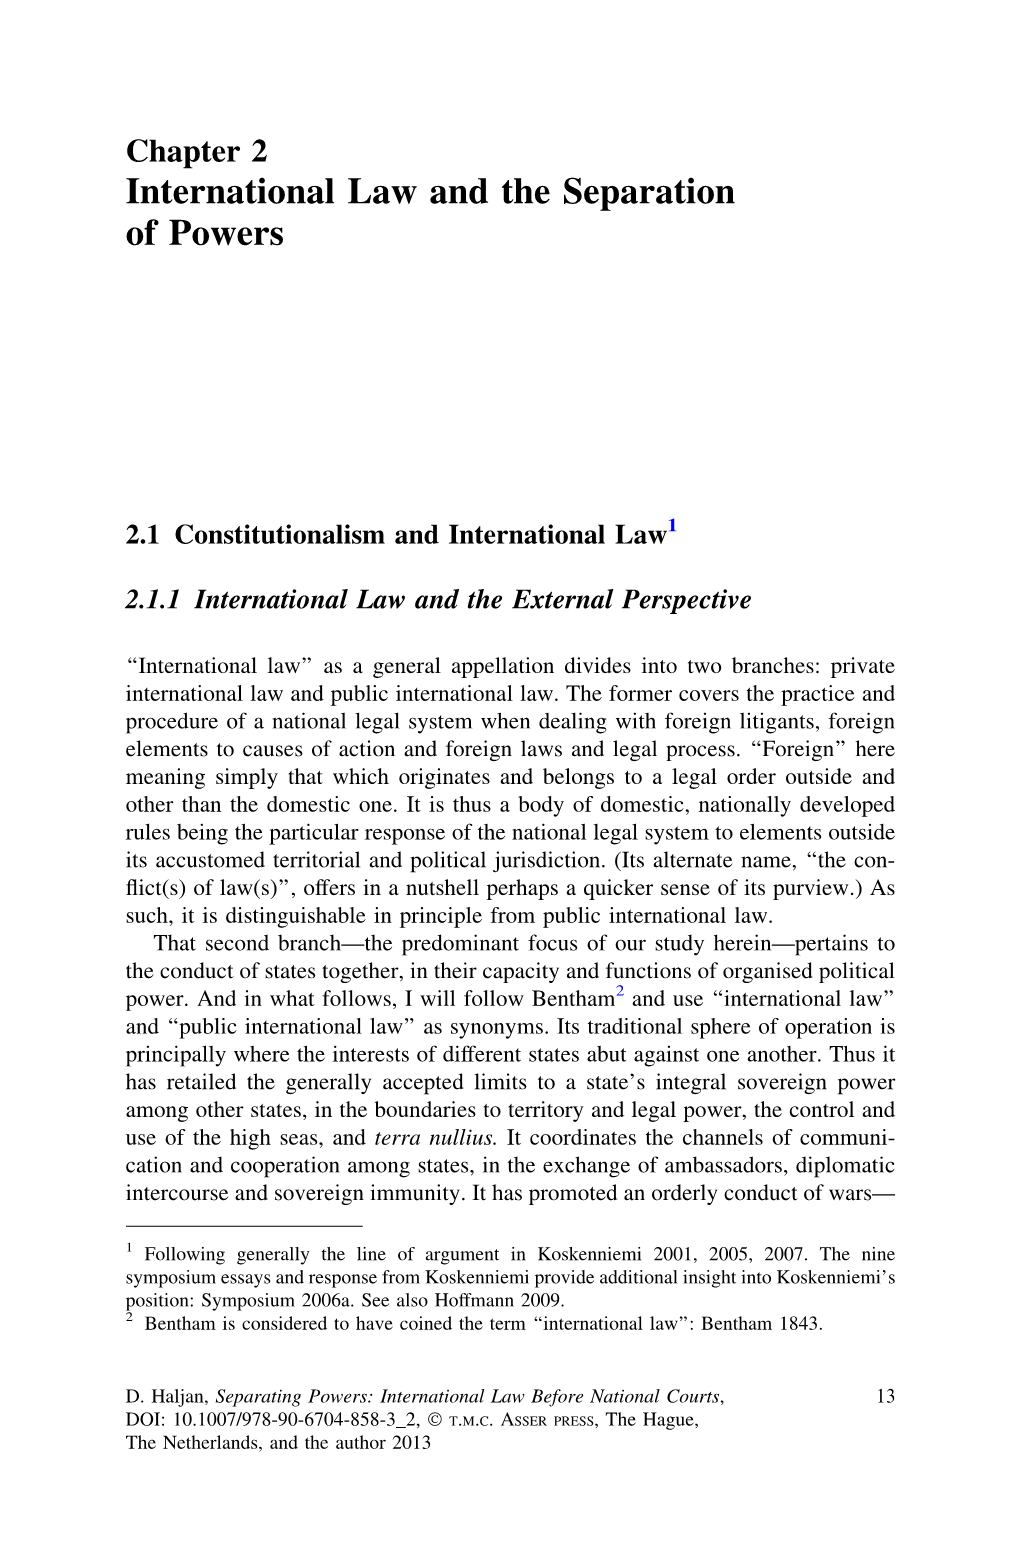 International Law and the Separation of Powers